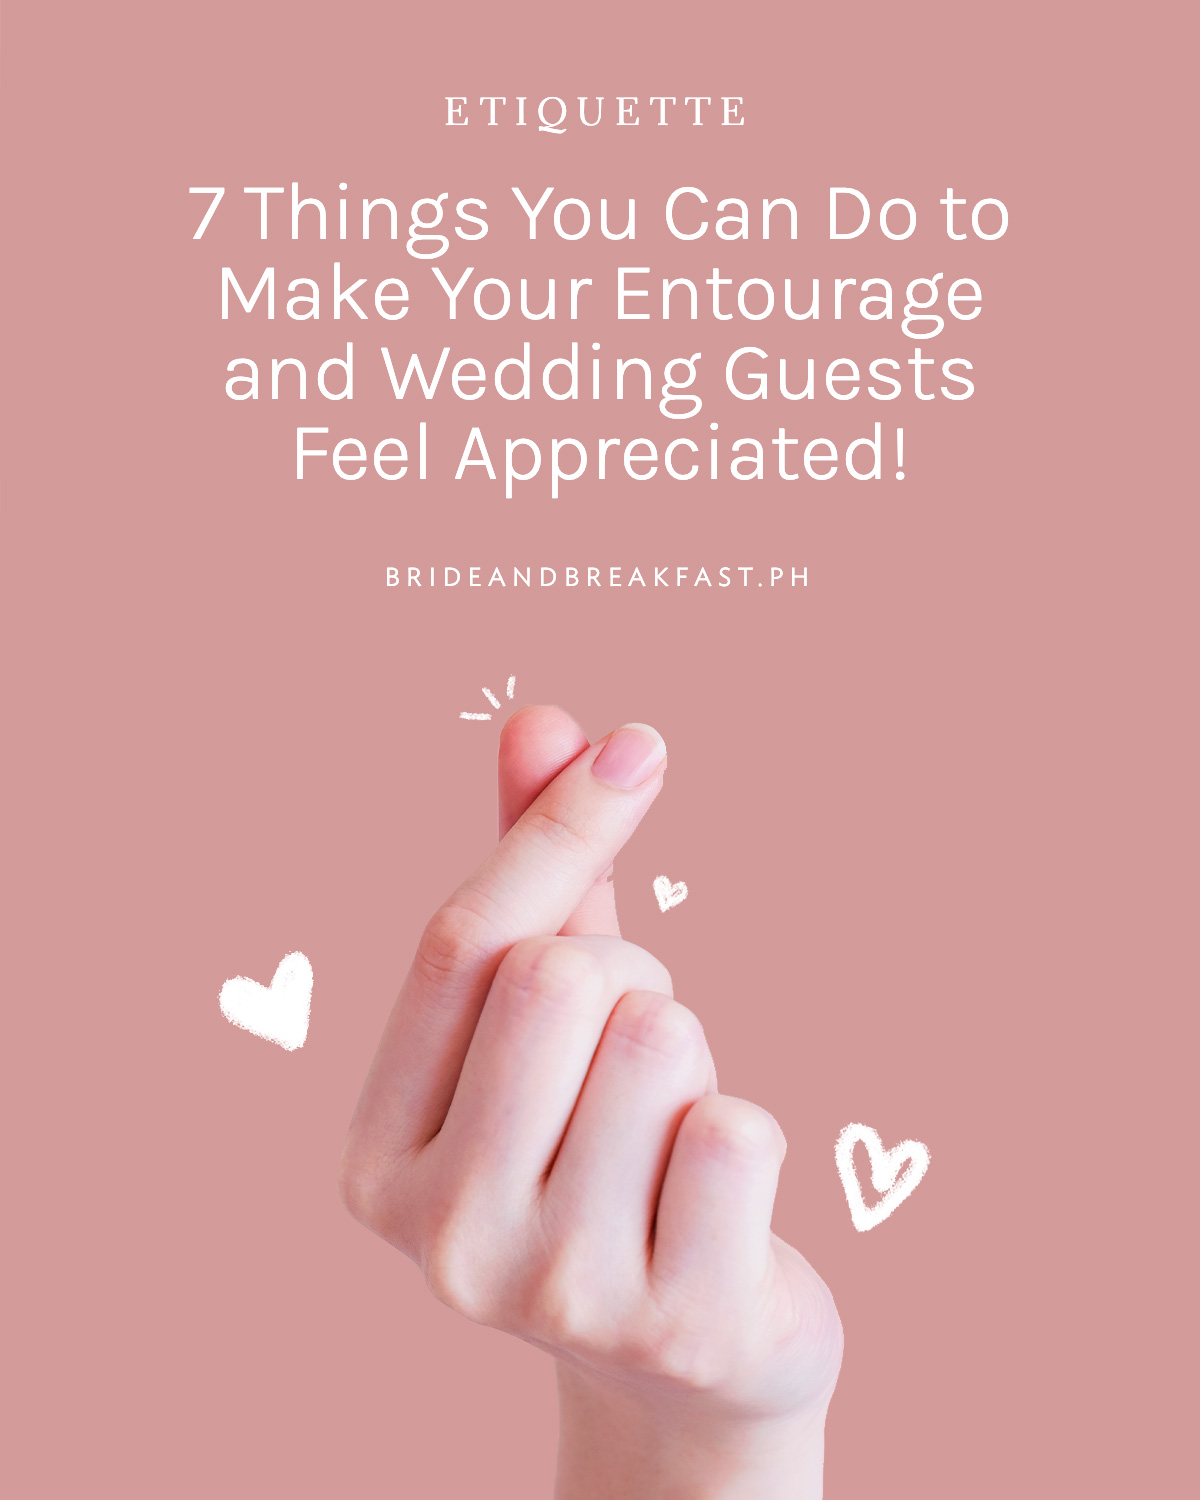 7 Things You Can Do to Make Your Entourage and Wedding Guests Feel Appreciated!